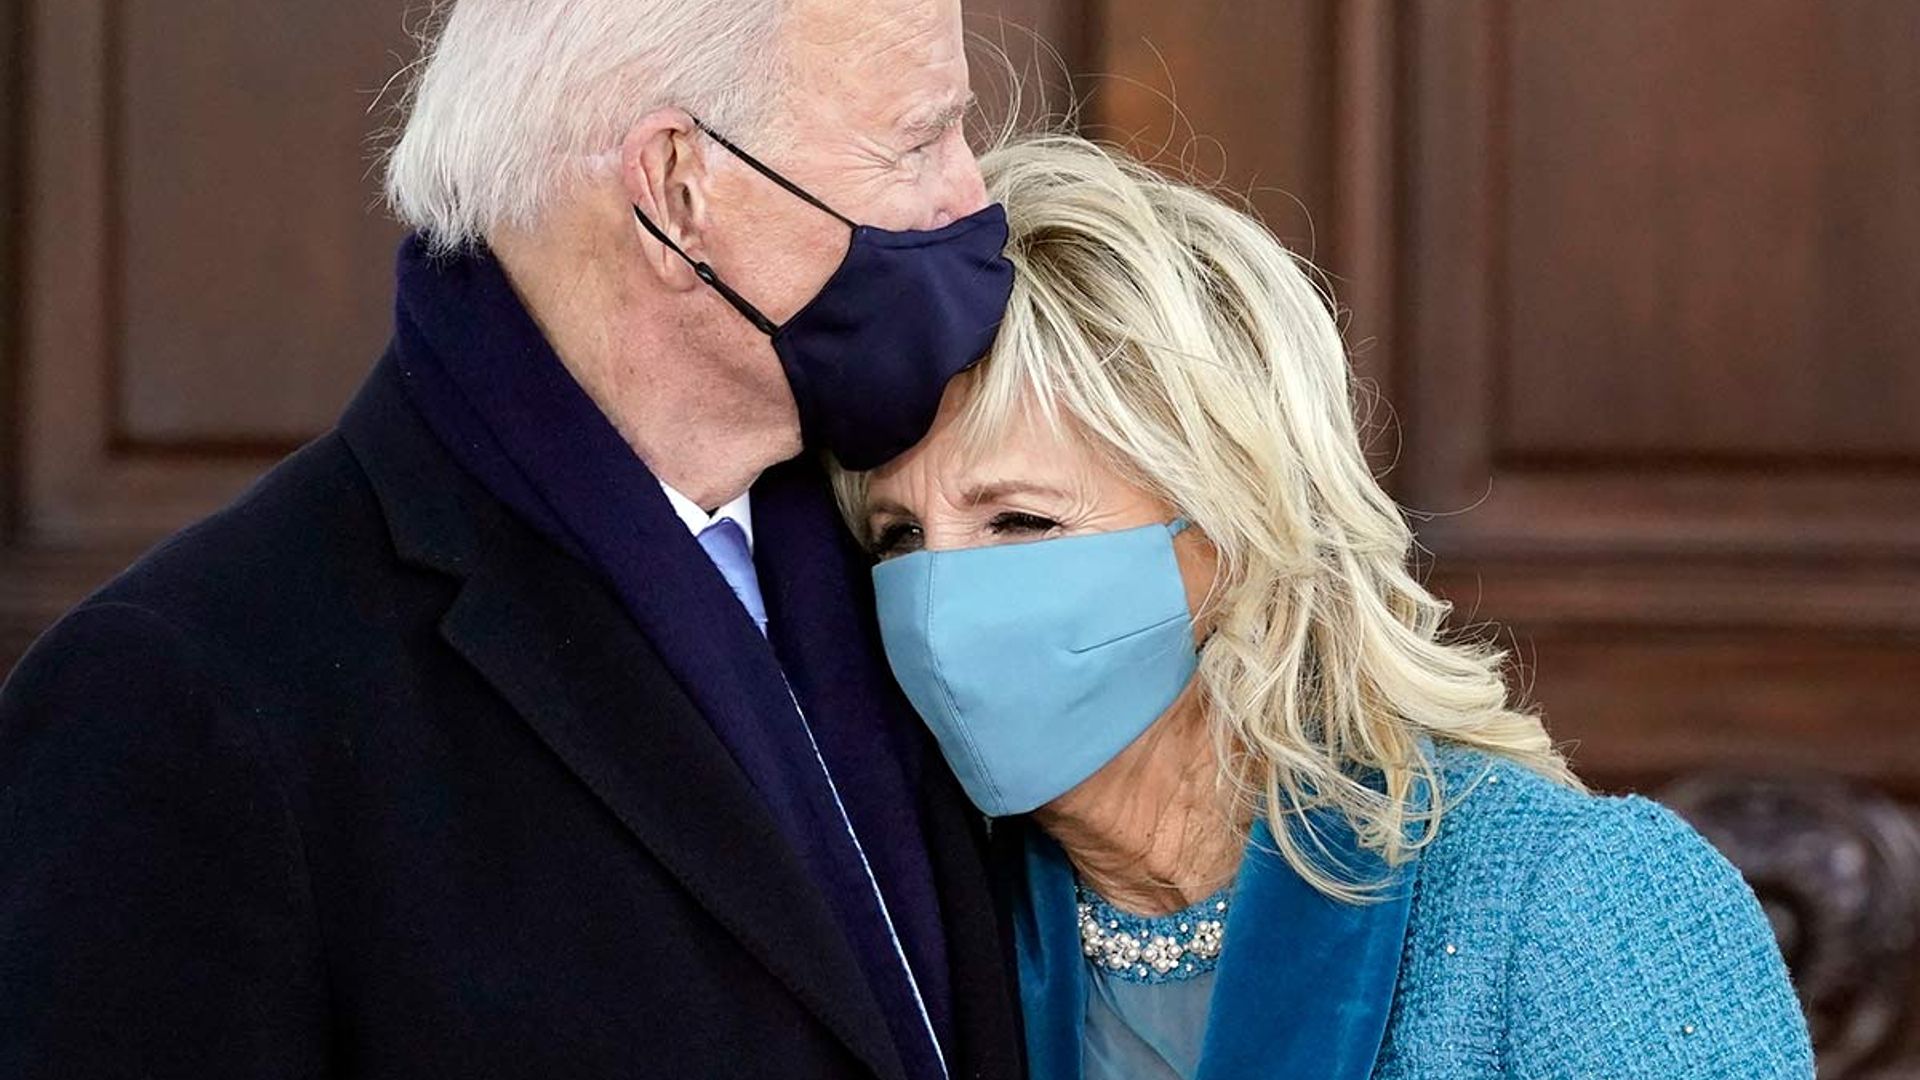 Jill Biden's elegant inauguration shoes had a very romantic meaning behind them